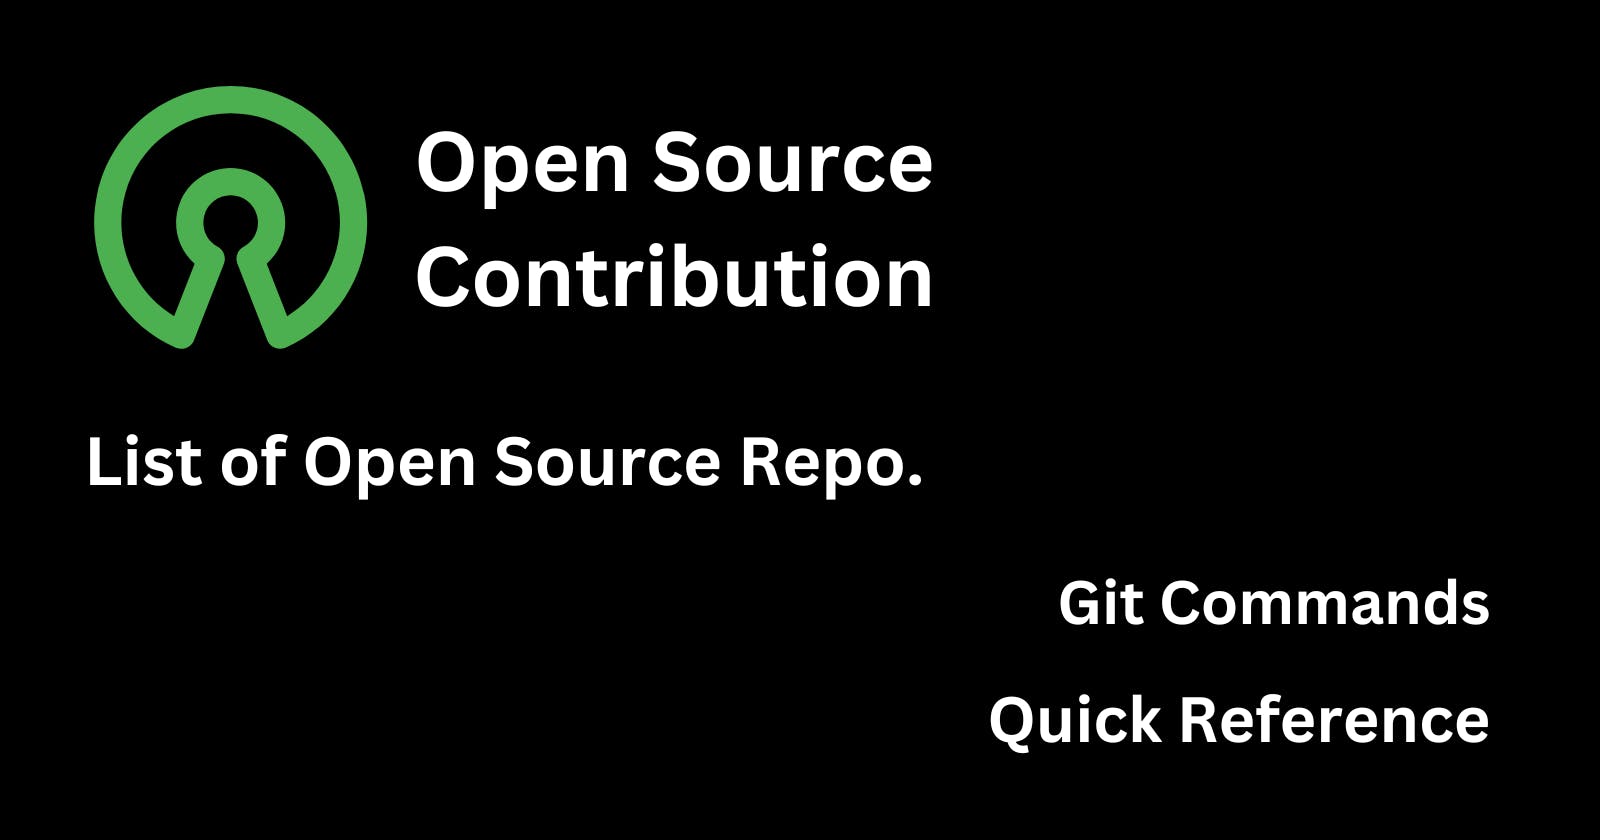 Git Commands for Open-Source Contribution